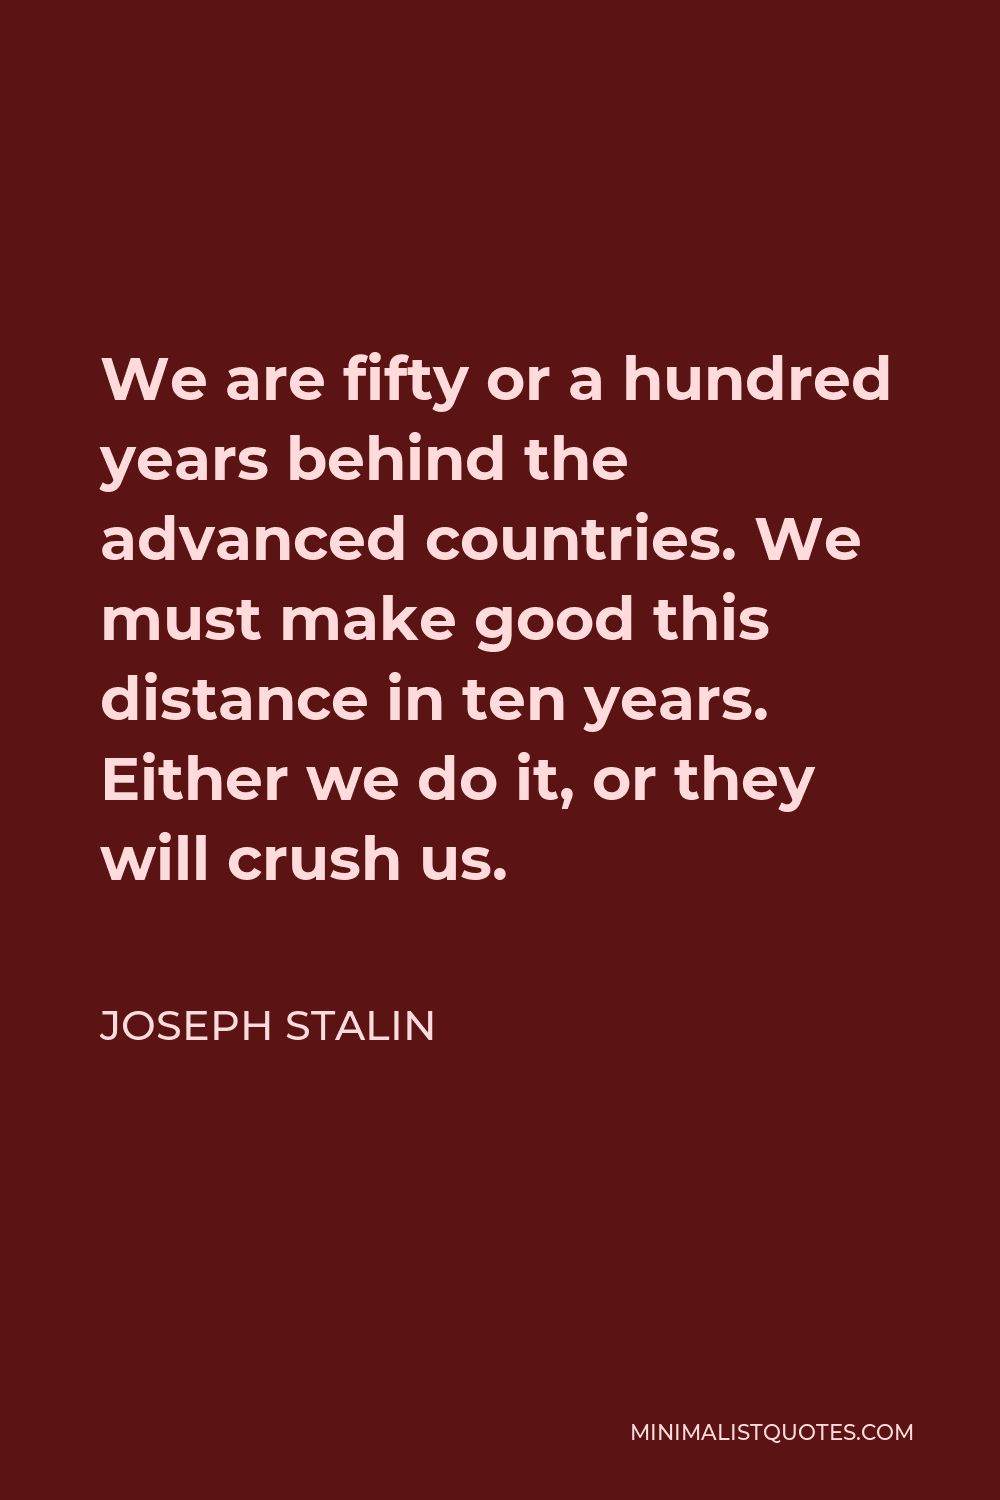 Joseph Stalin Quote - We are fifty or a hundred years behind the advanced countries. We must make good this distance in ten years. Either we do it, or they will crush us.